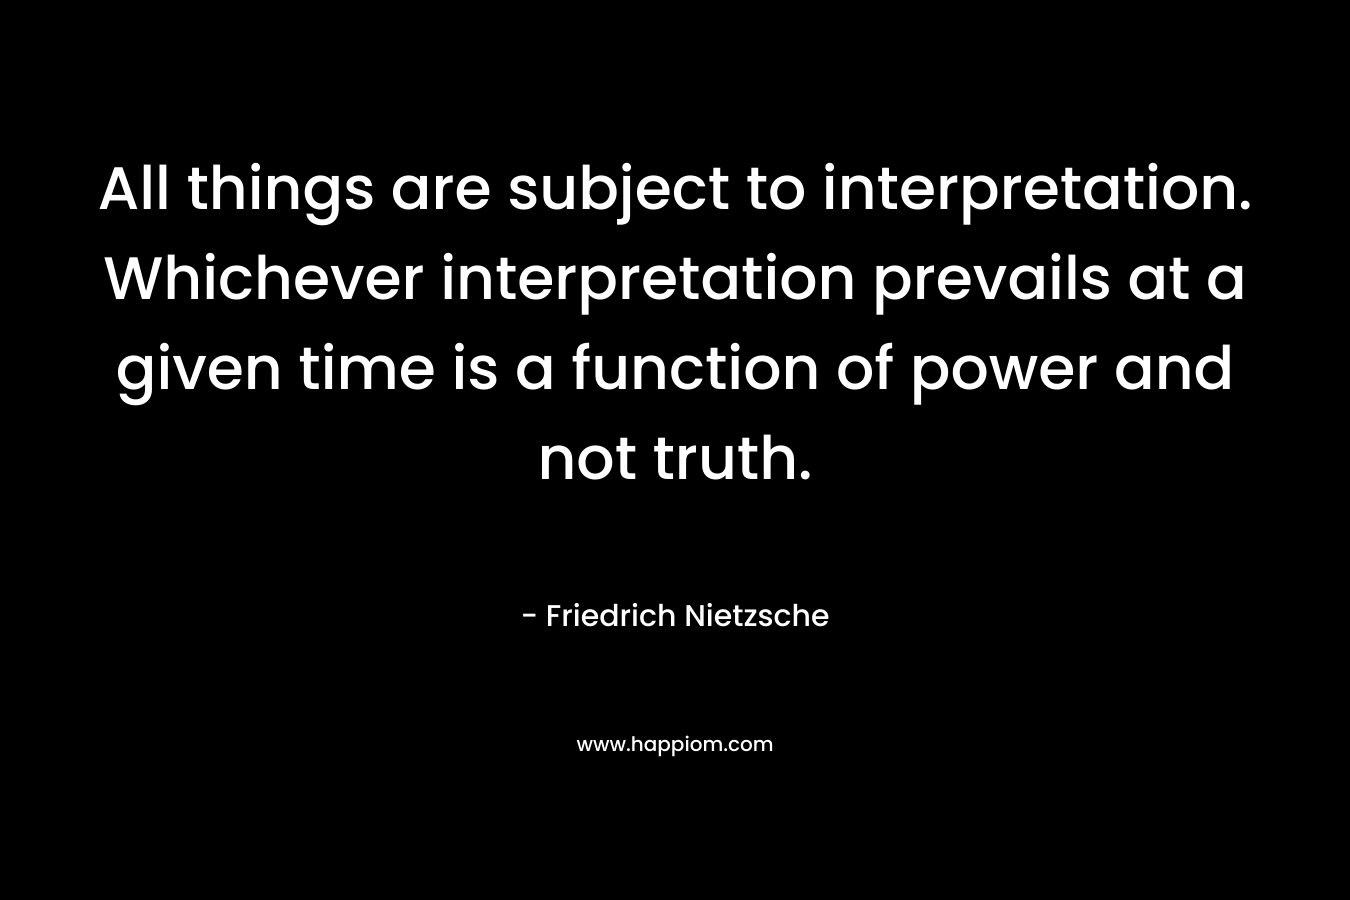 All things are subject to interpretation. Whichever interpretation prevails at a given time is a function of power and not truth. – Friedrich Nietzsche